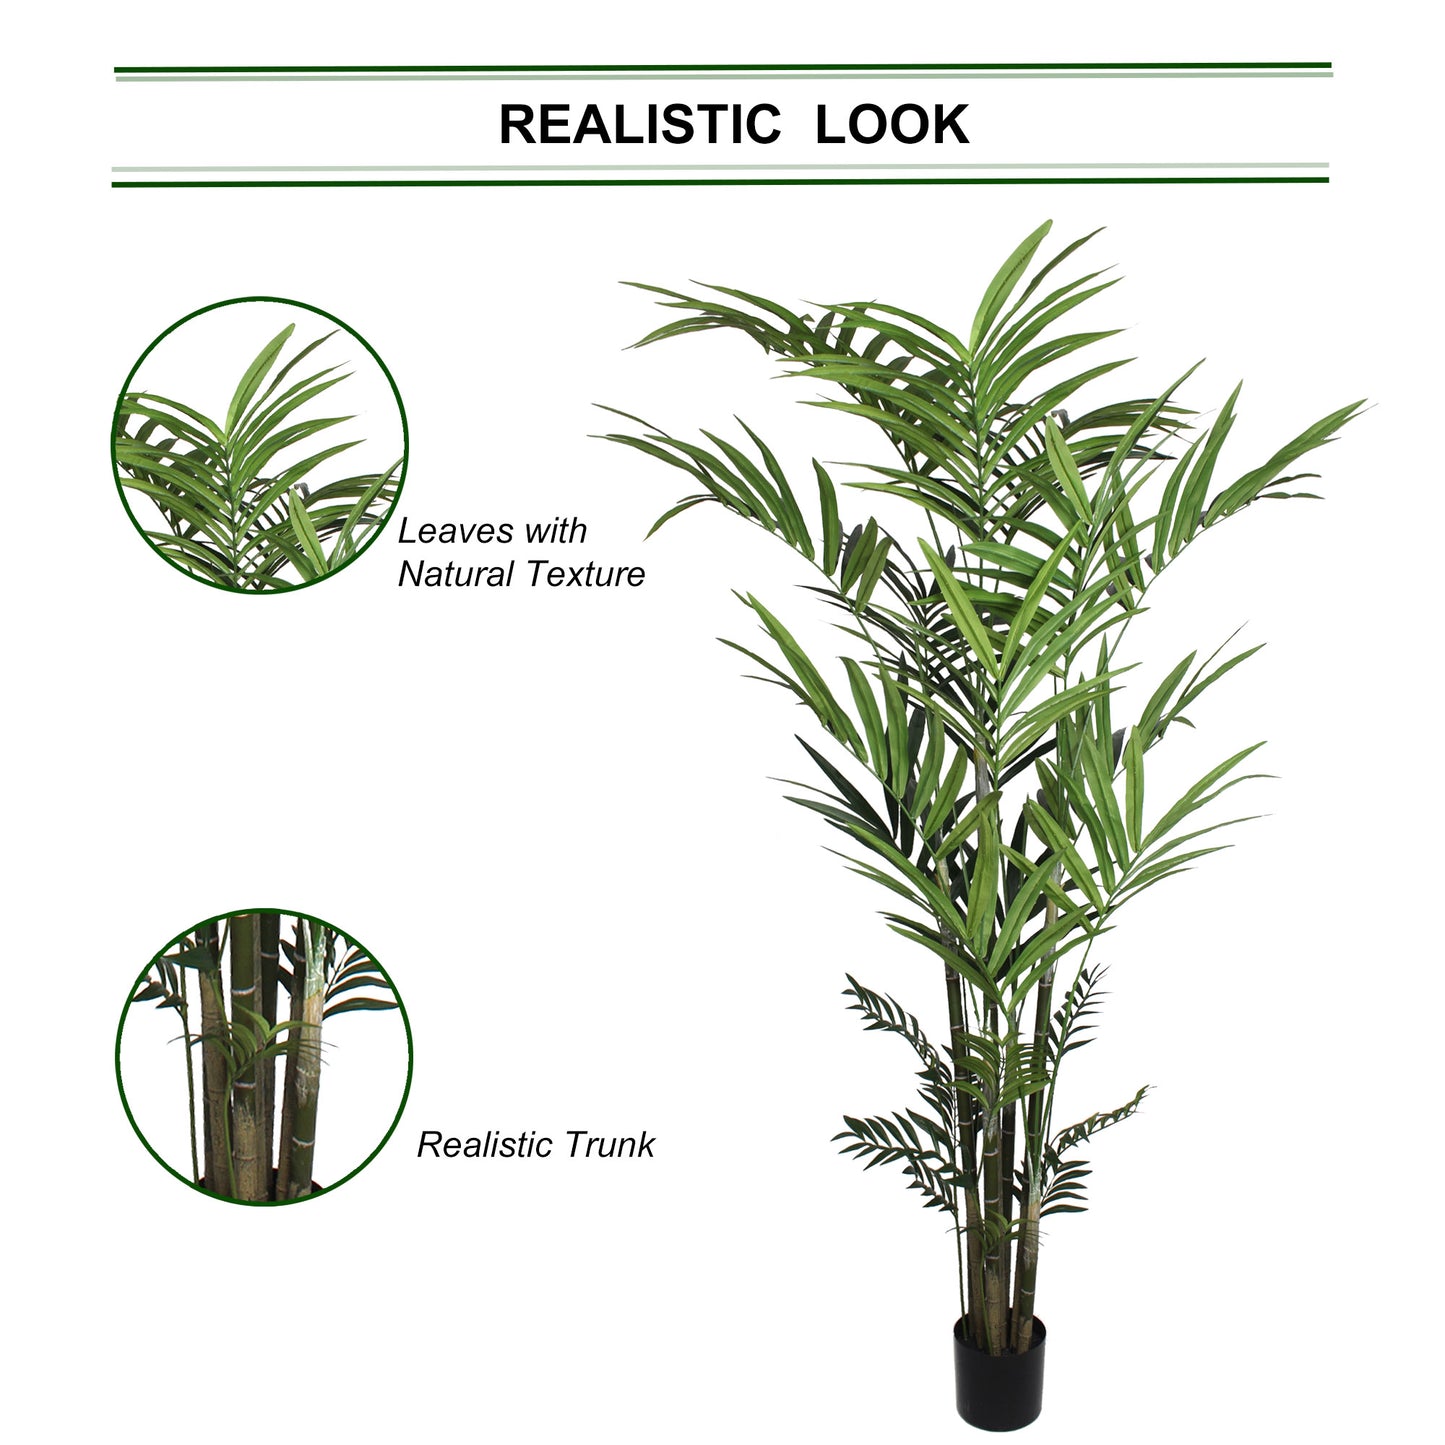 Lush 8' Indoor Kentia Palm Tree with 399 Leaves - Potted Tropical Foliage Decor for Home or Office